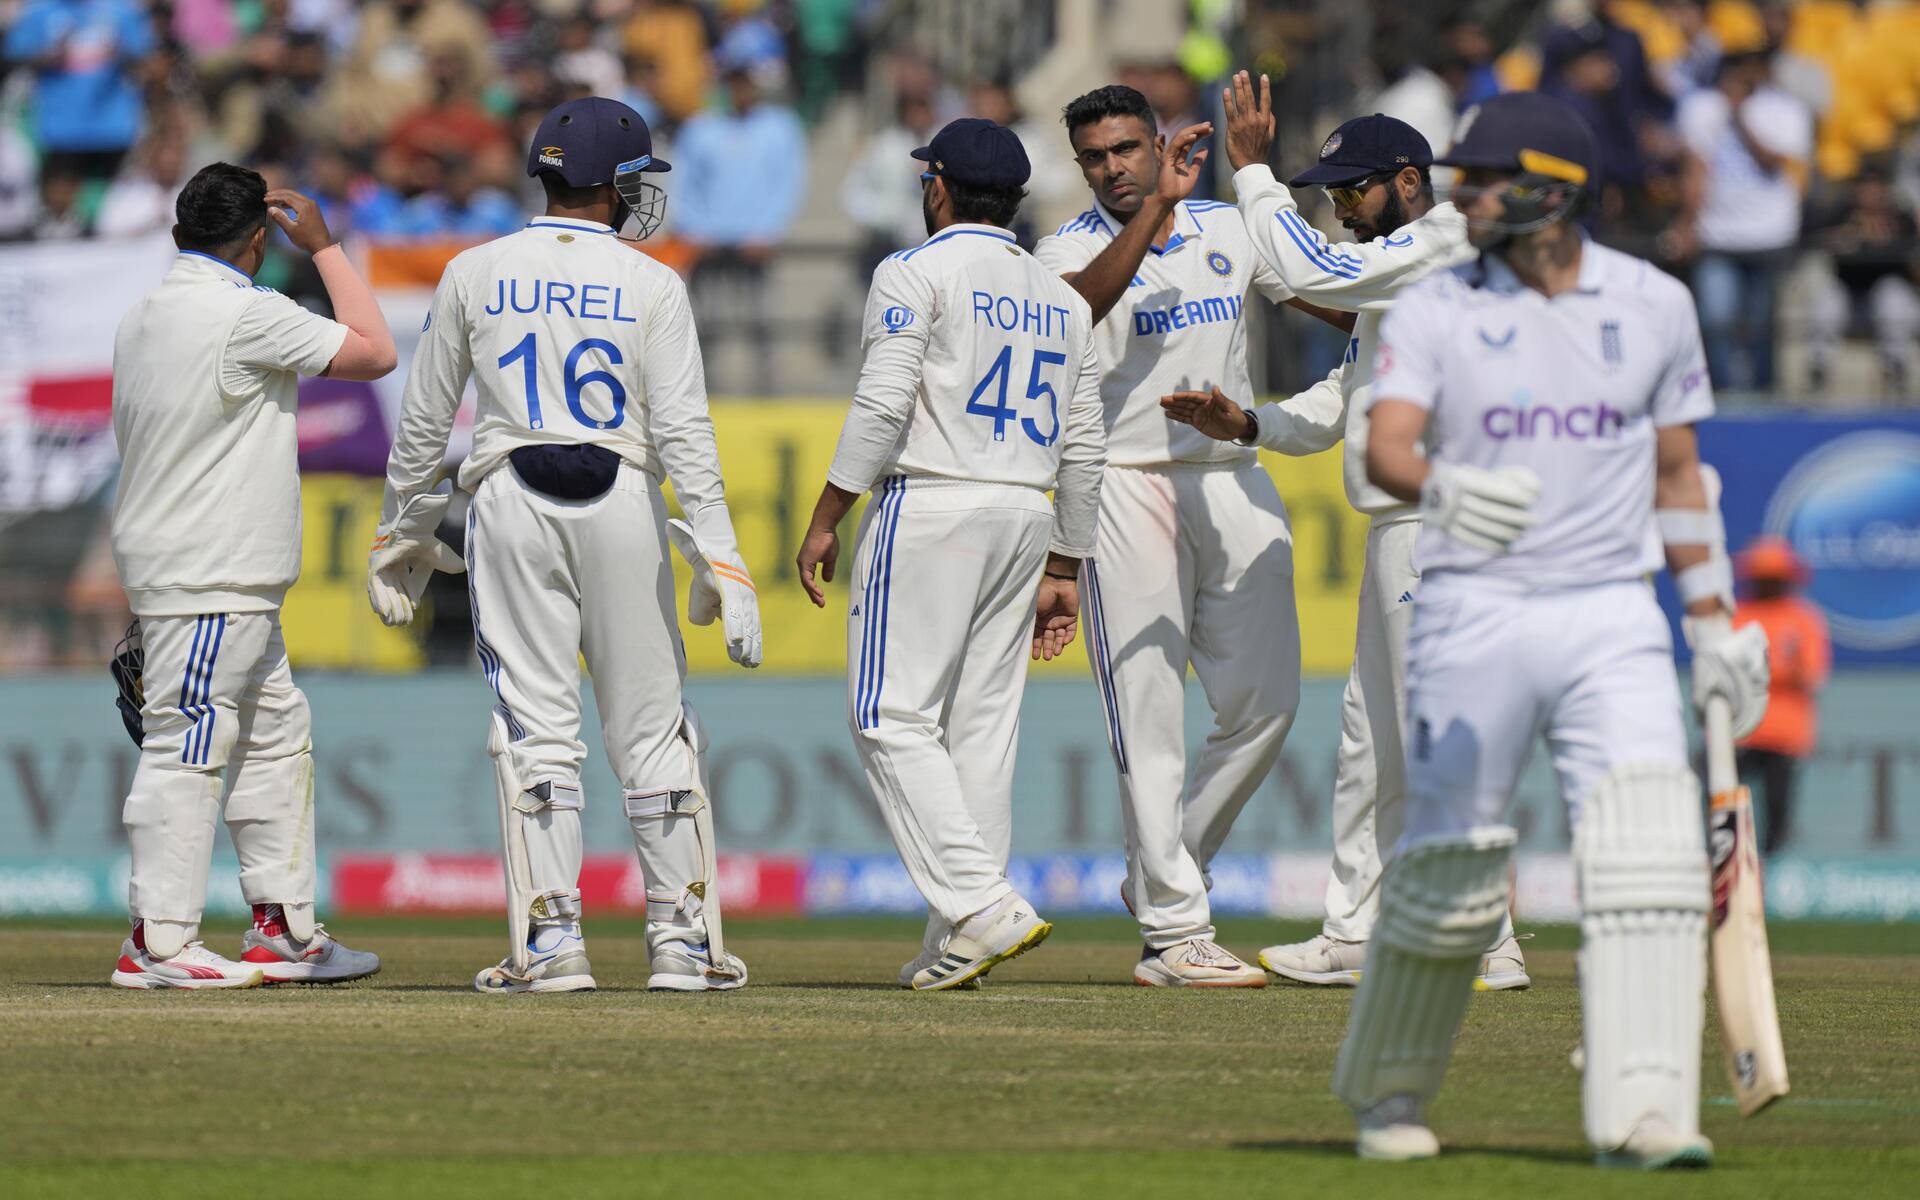 R Ashwin got two wickets in the same over (Source: AP Photo)